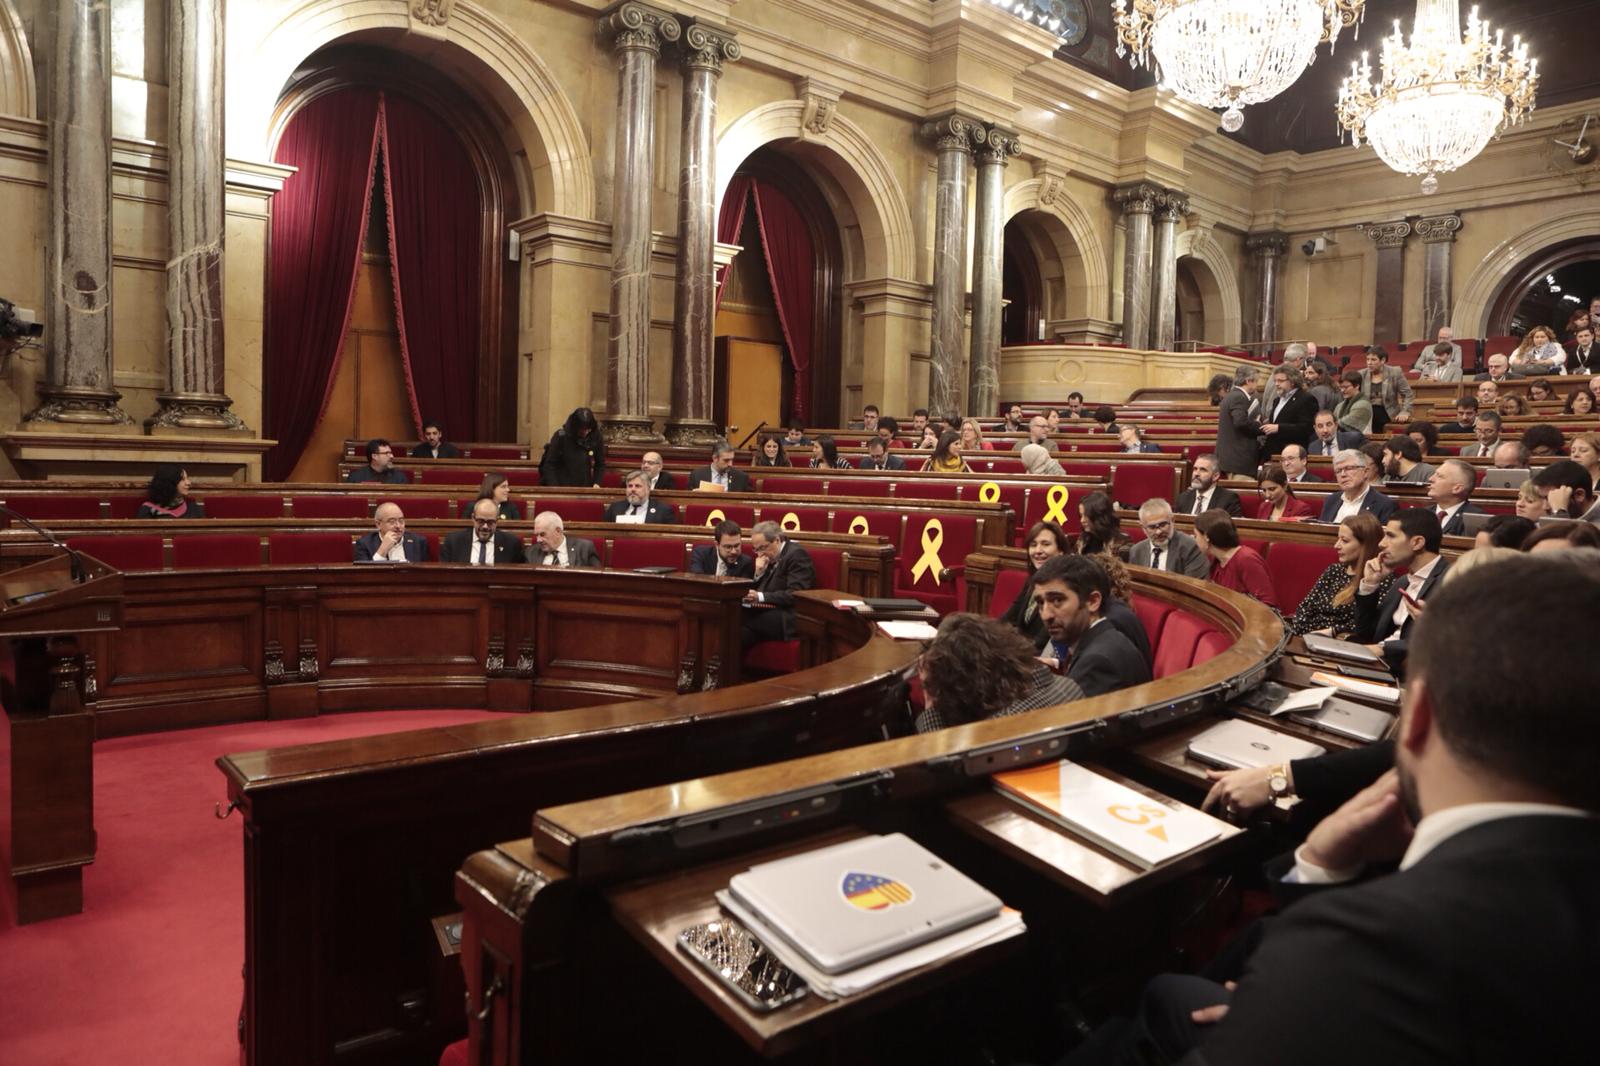 Poll: Pro-independence parties would consolidate majority in Catalan parliament